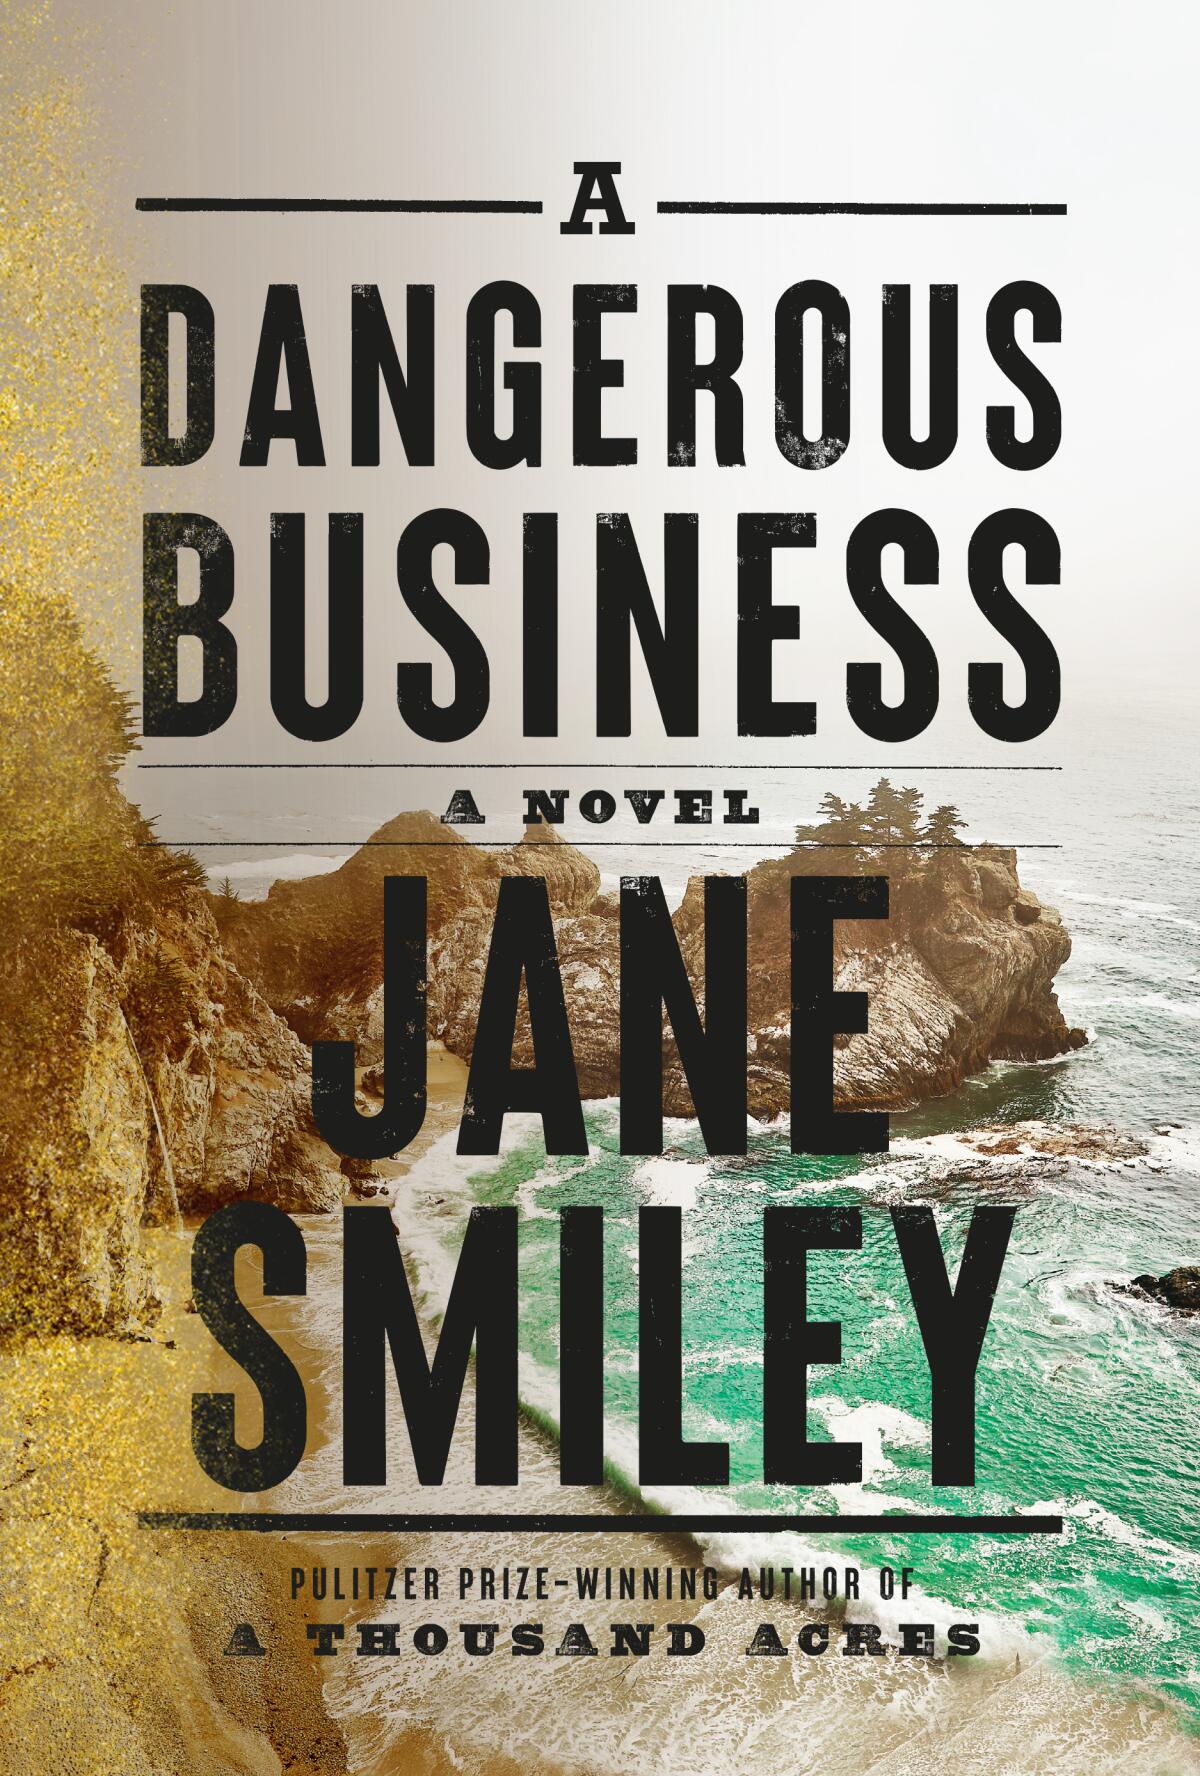 'A Dangerous Business,' by Jane Smiley